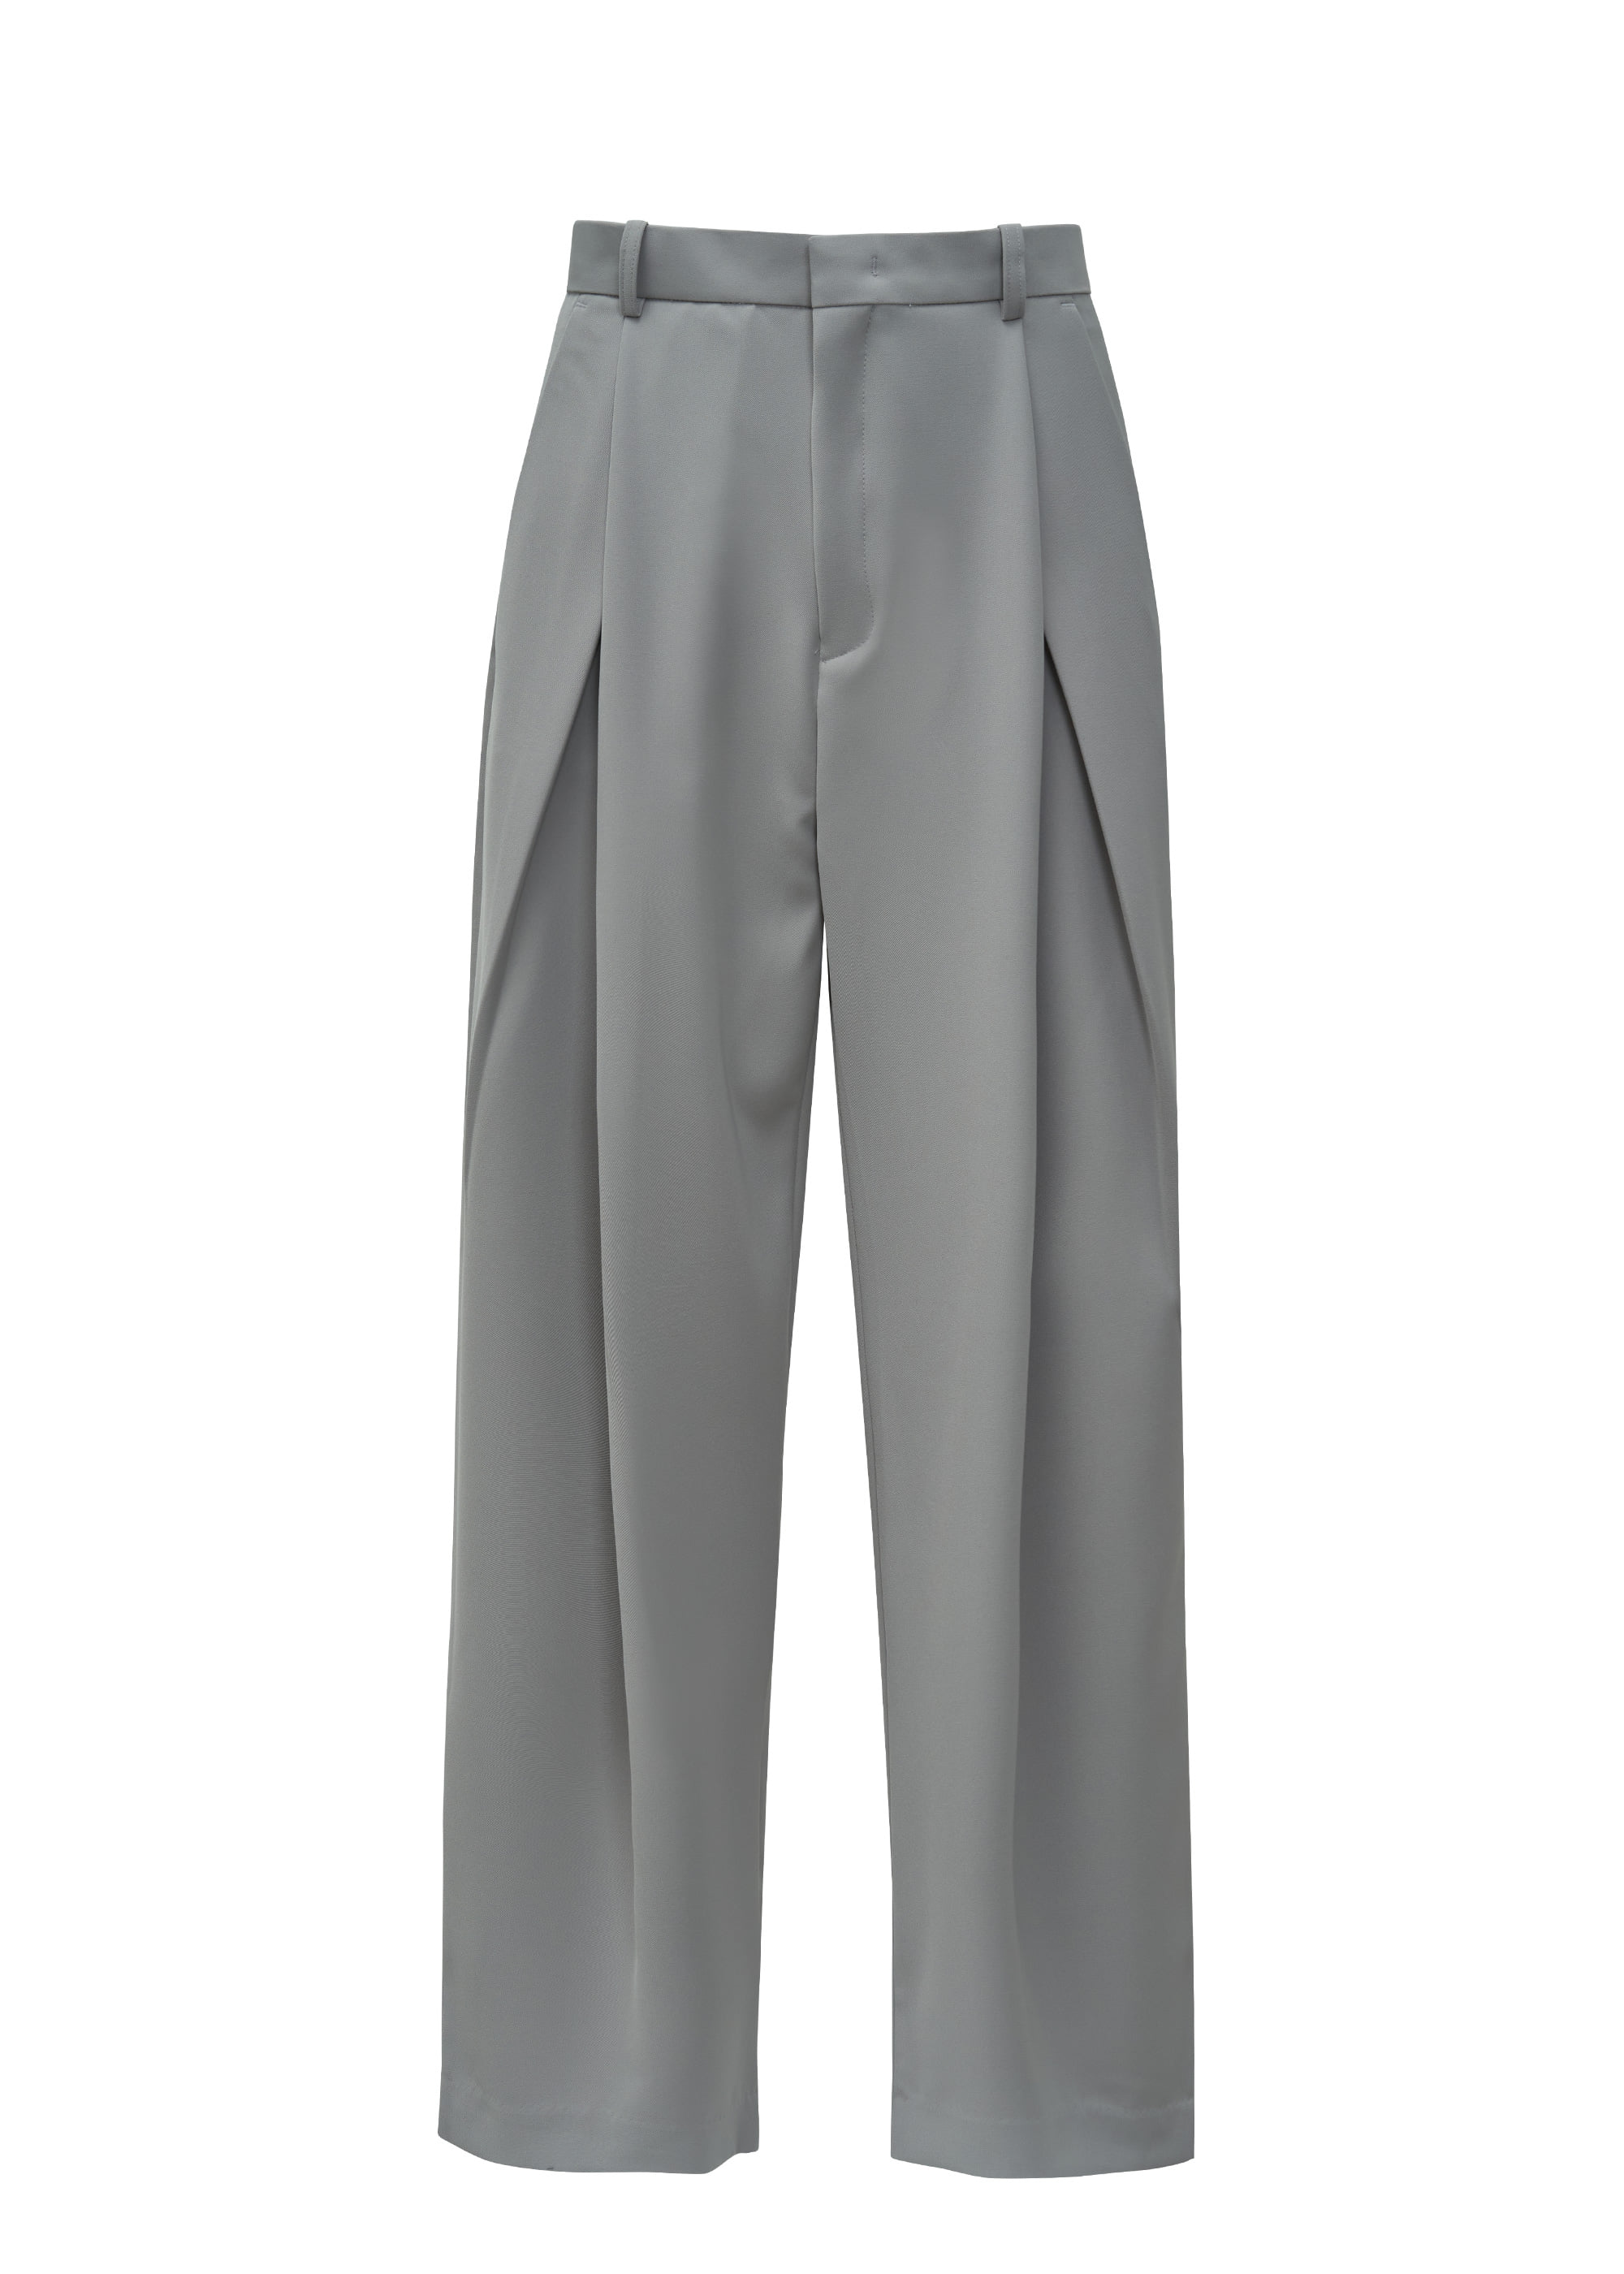 Spring andTuck Pants